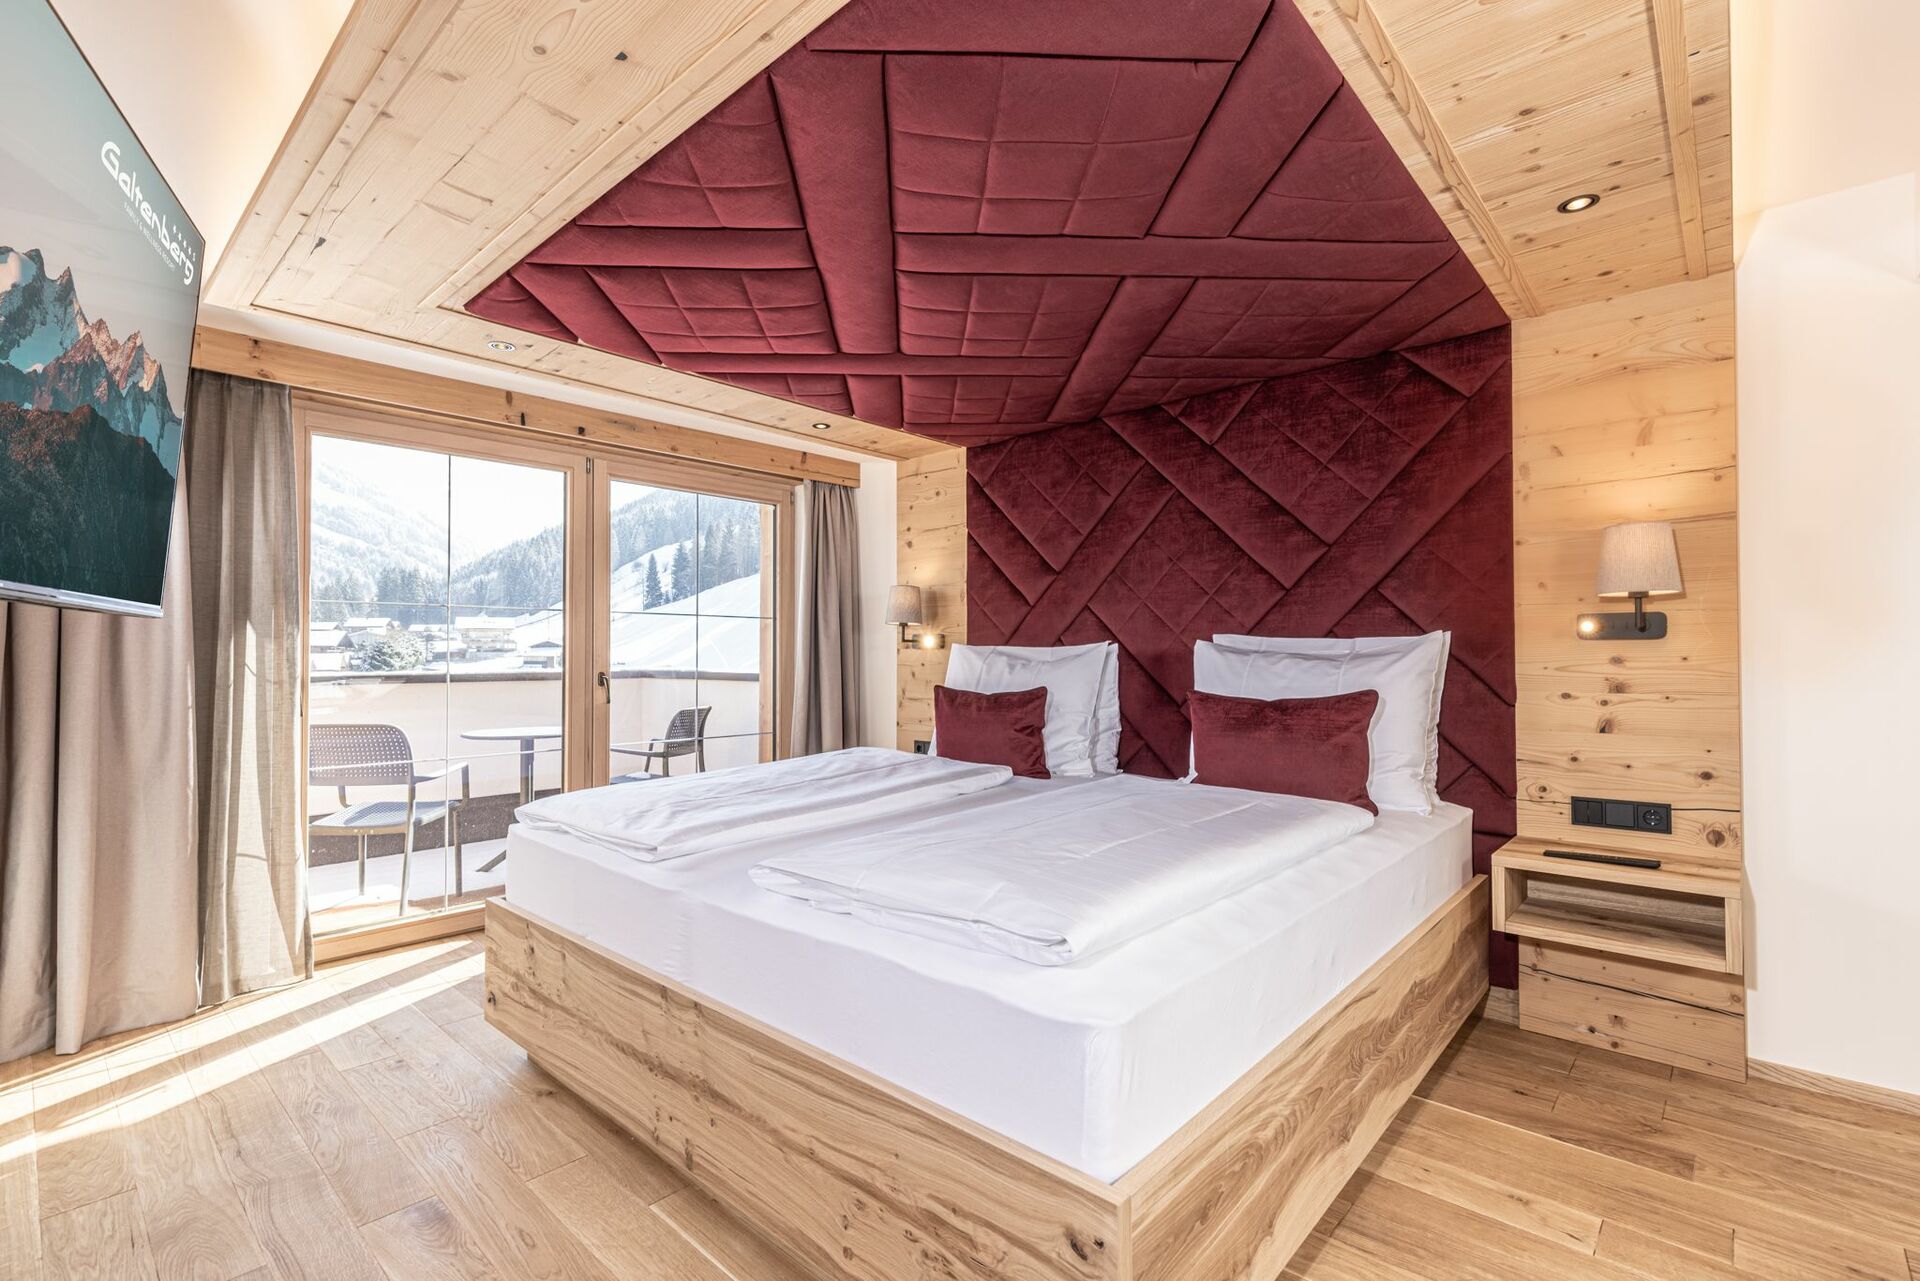 A romantic bed in a wooden room with a view of the mountains.